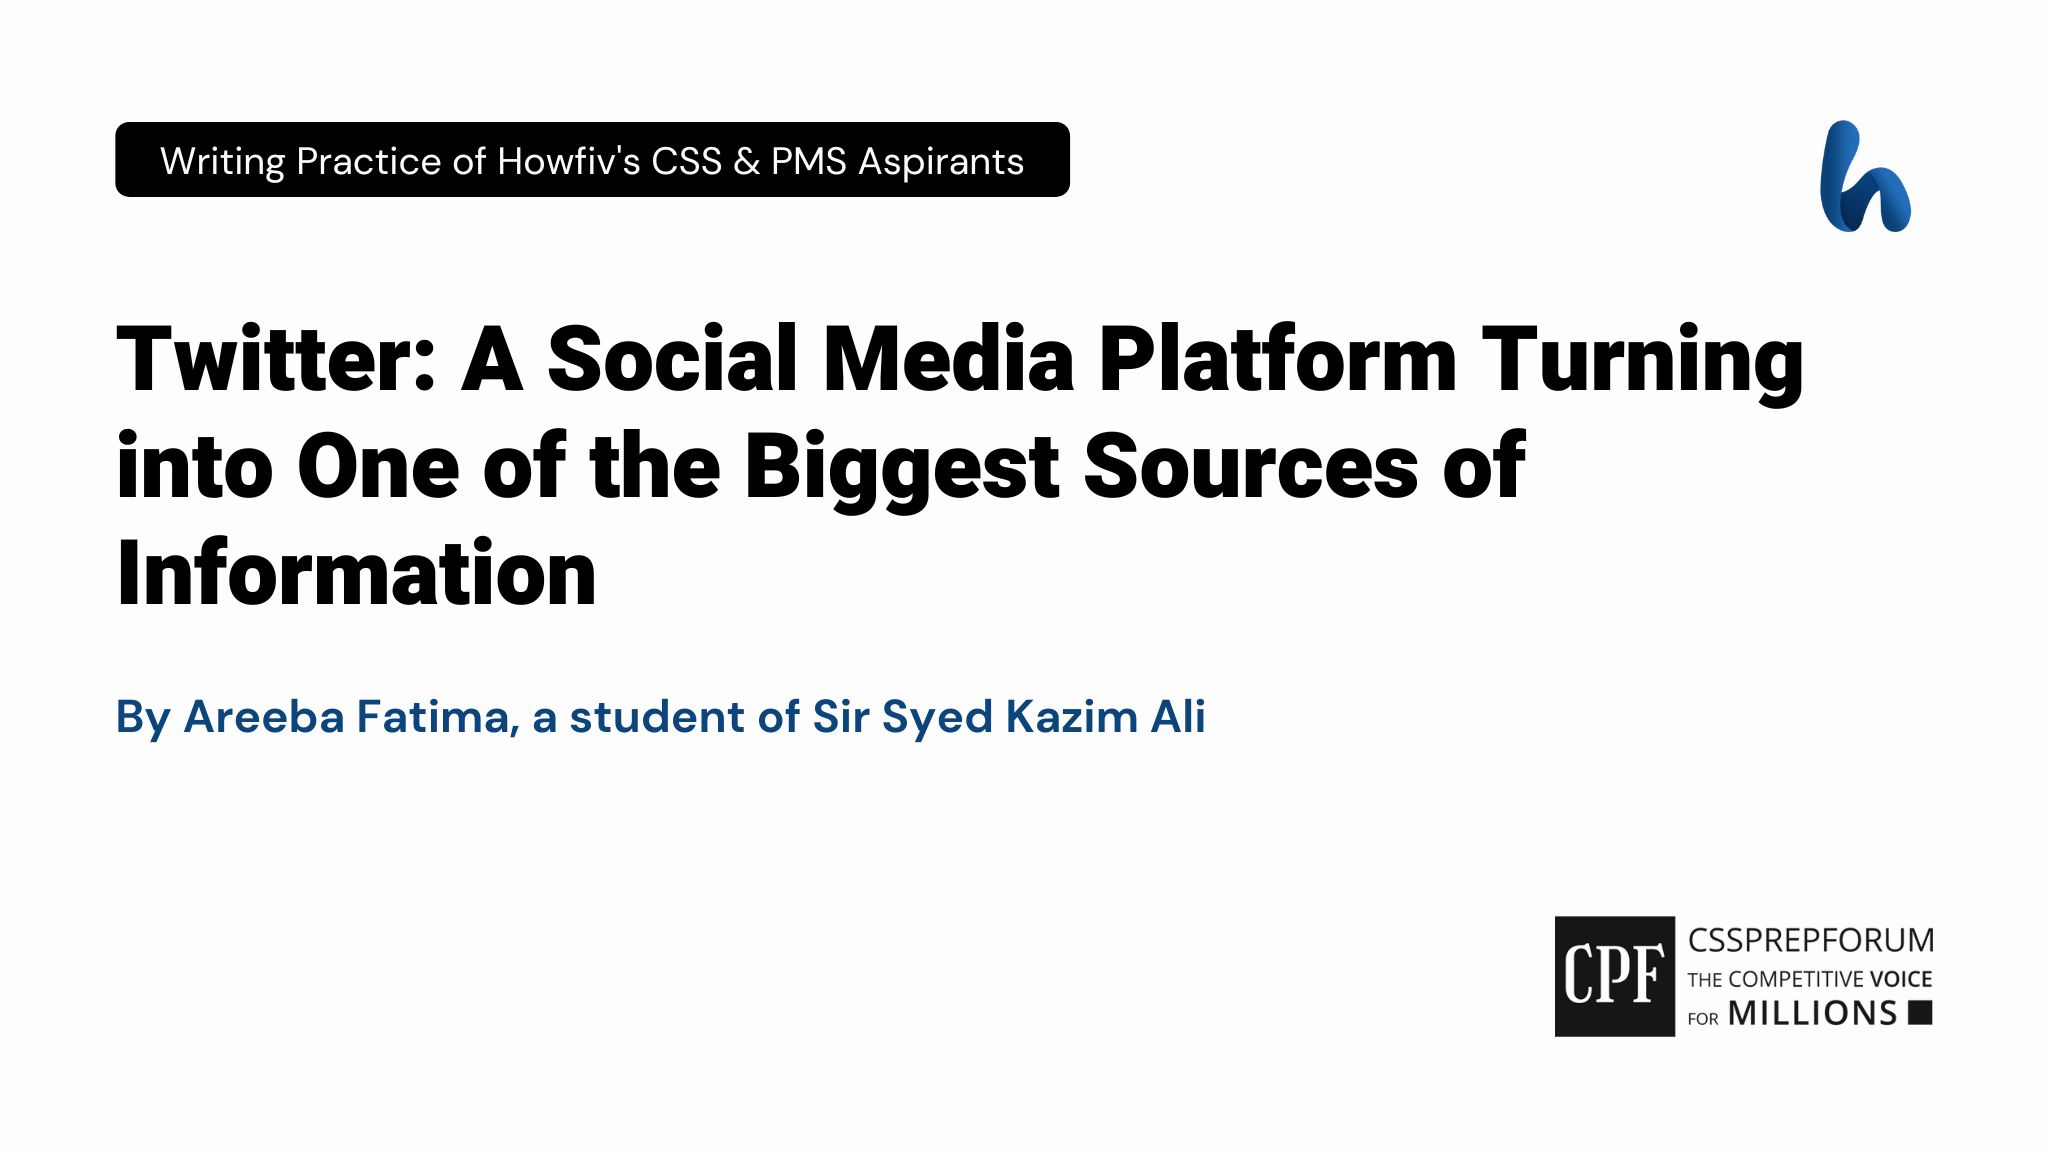 Twitter: A Social Media Platform Turning into One of the Biggest Sources of Information